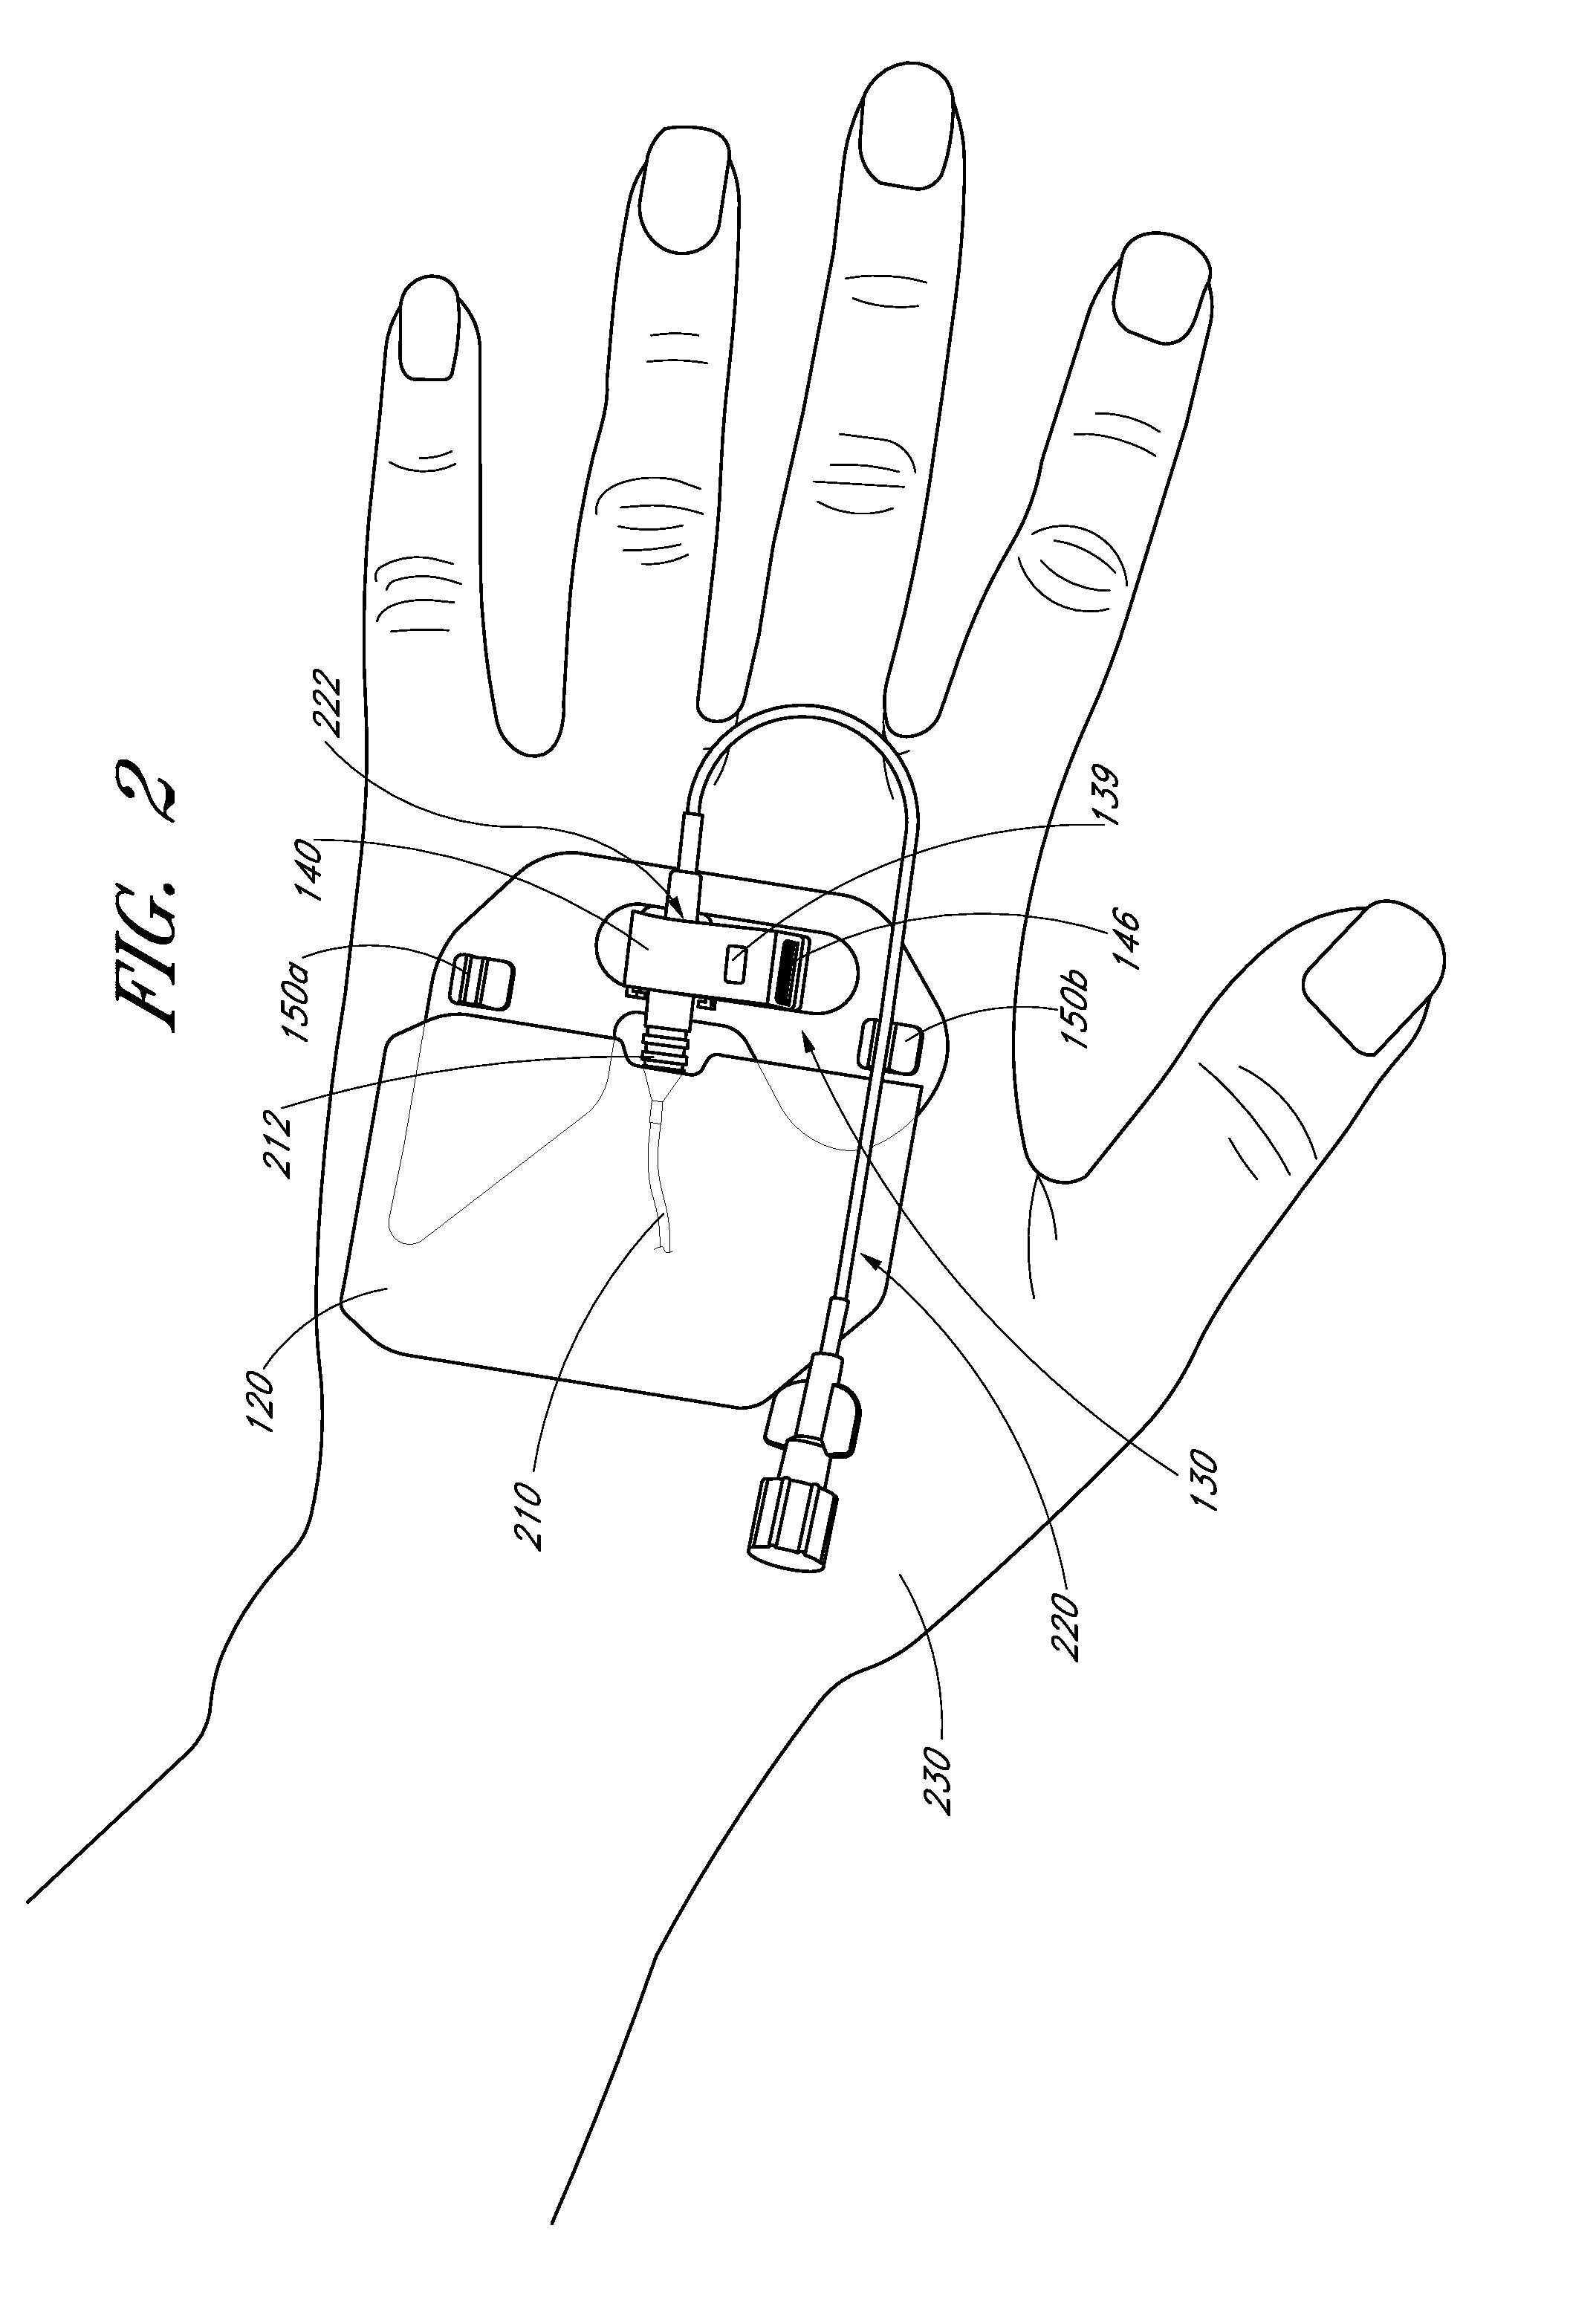 Stabilizing device for an extension set